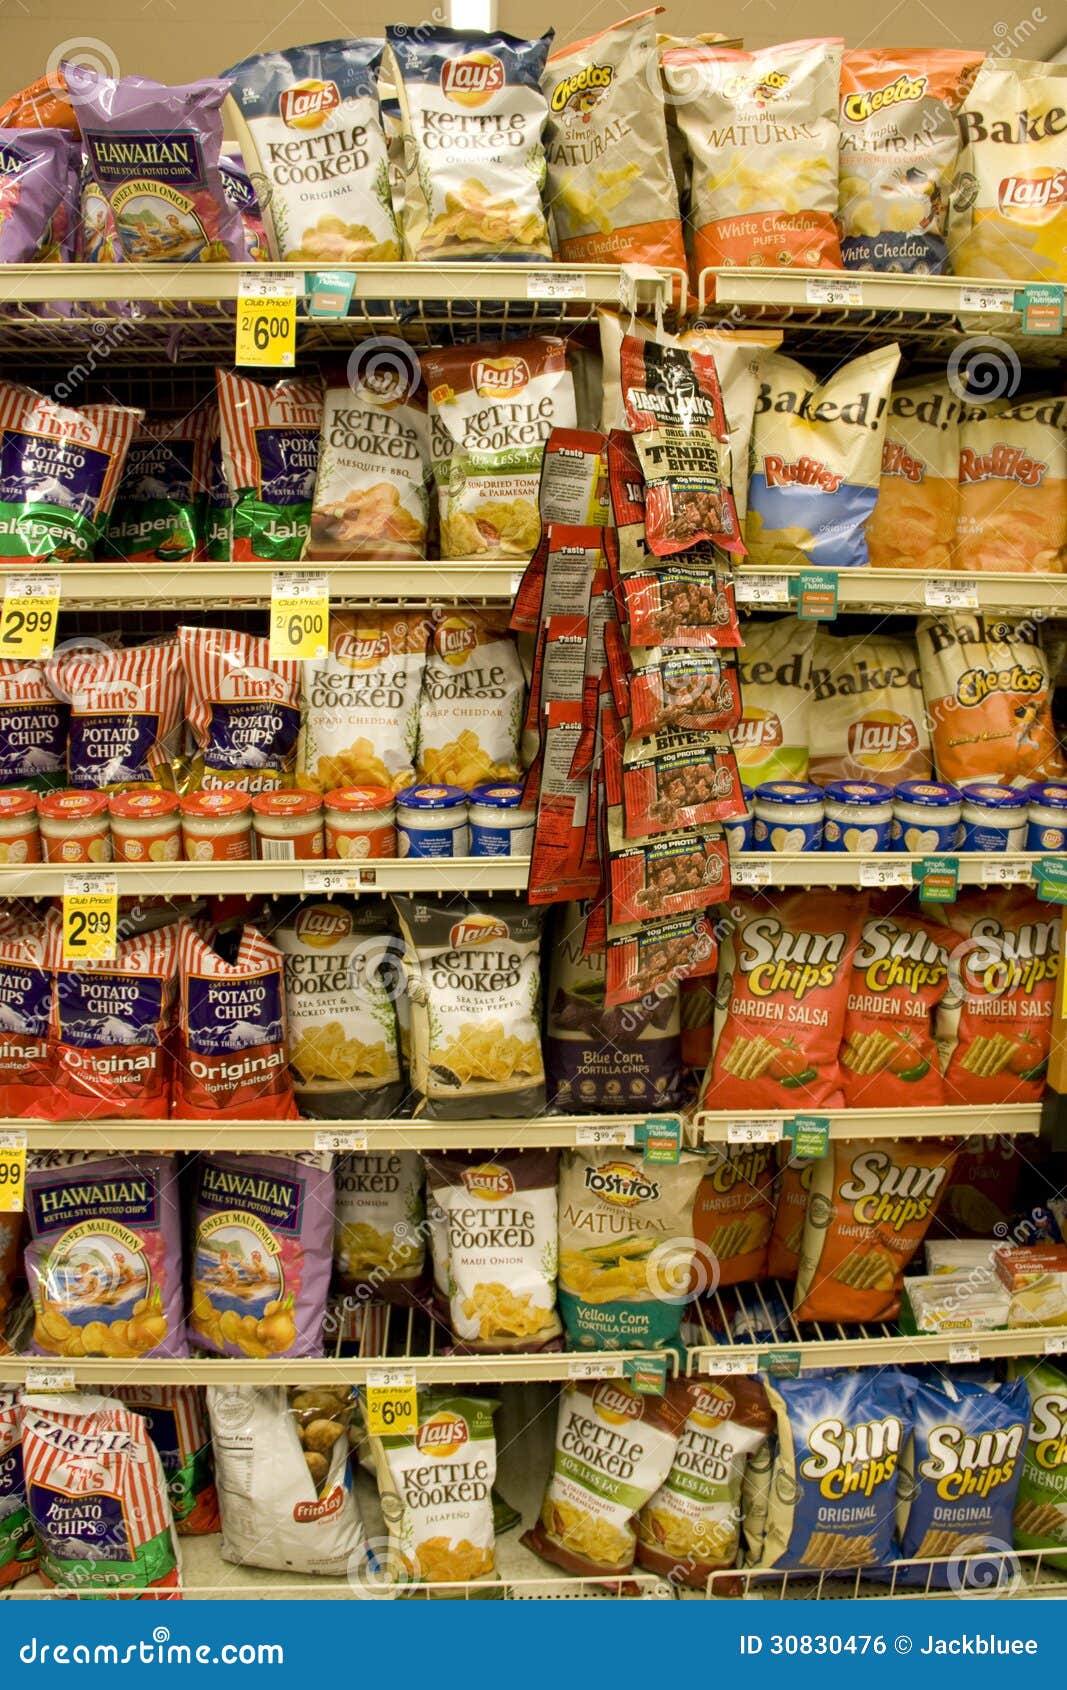 Lot: Chips